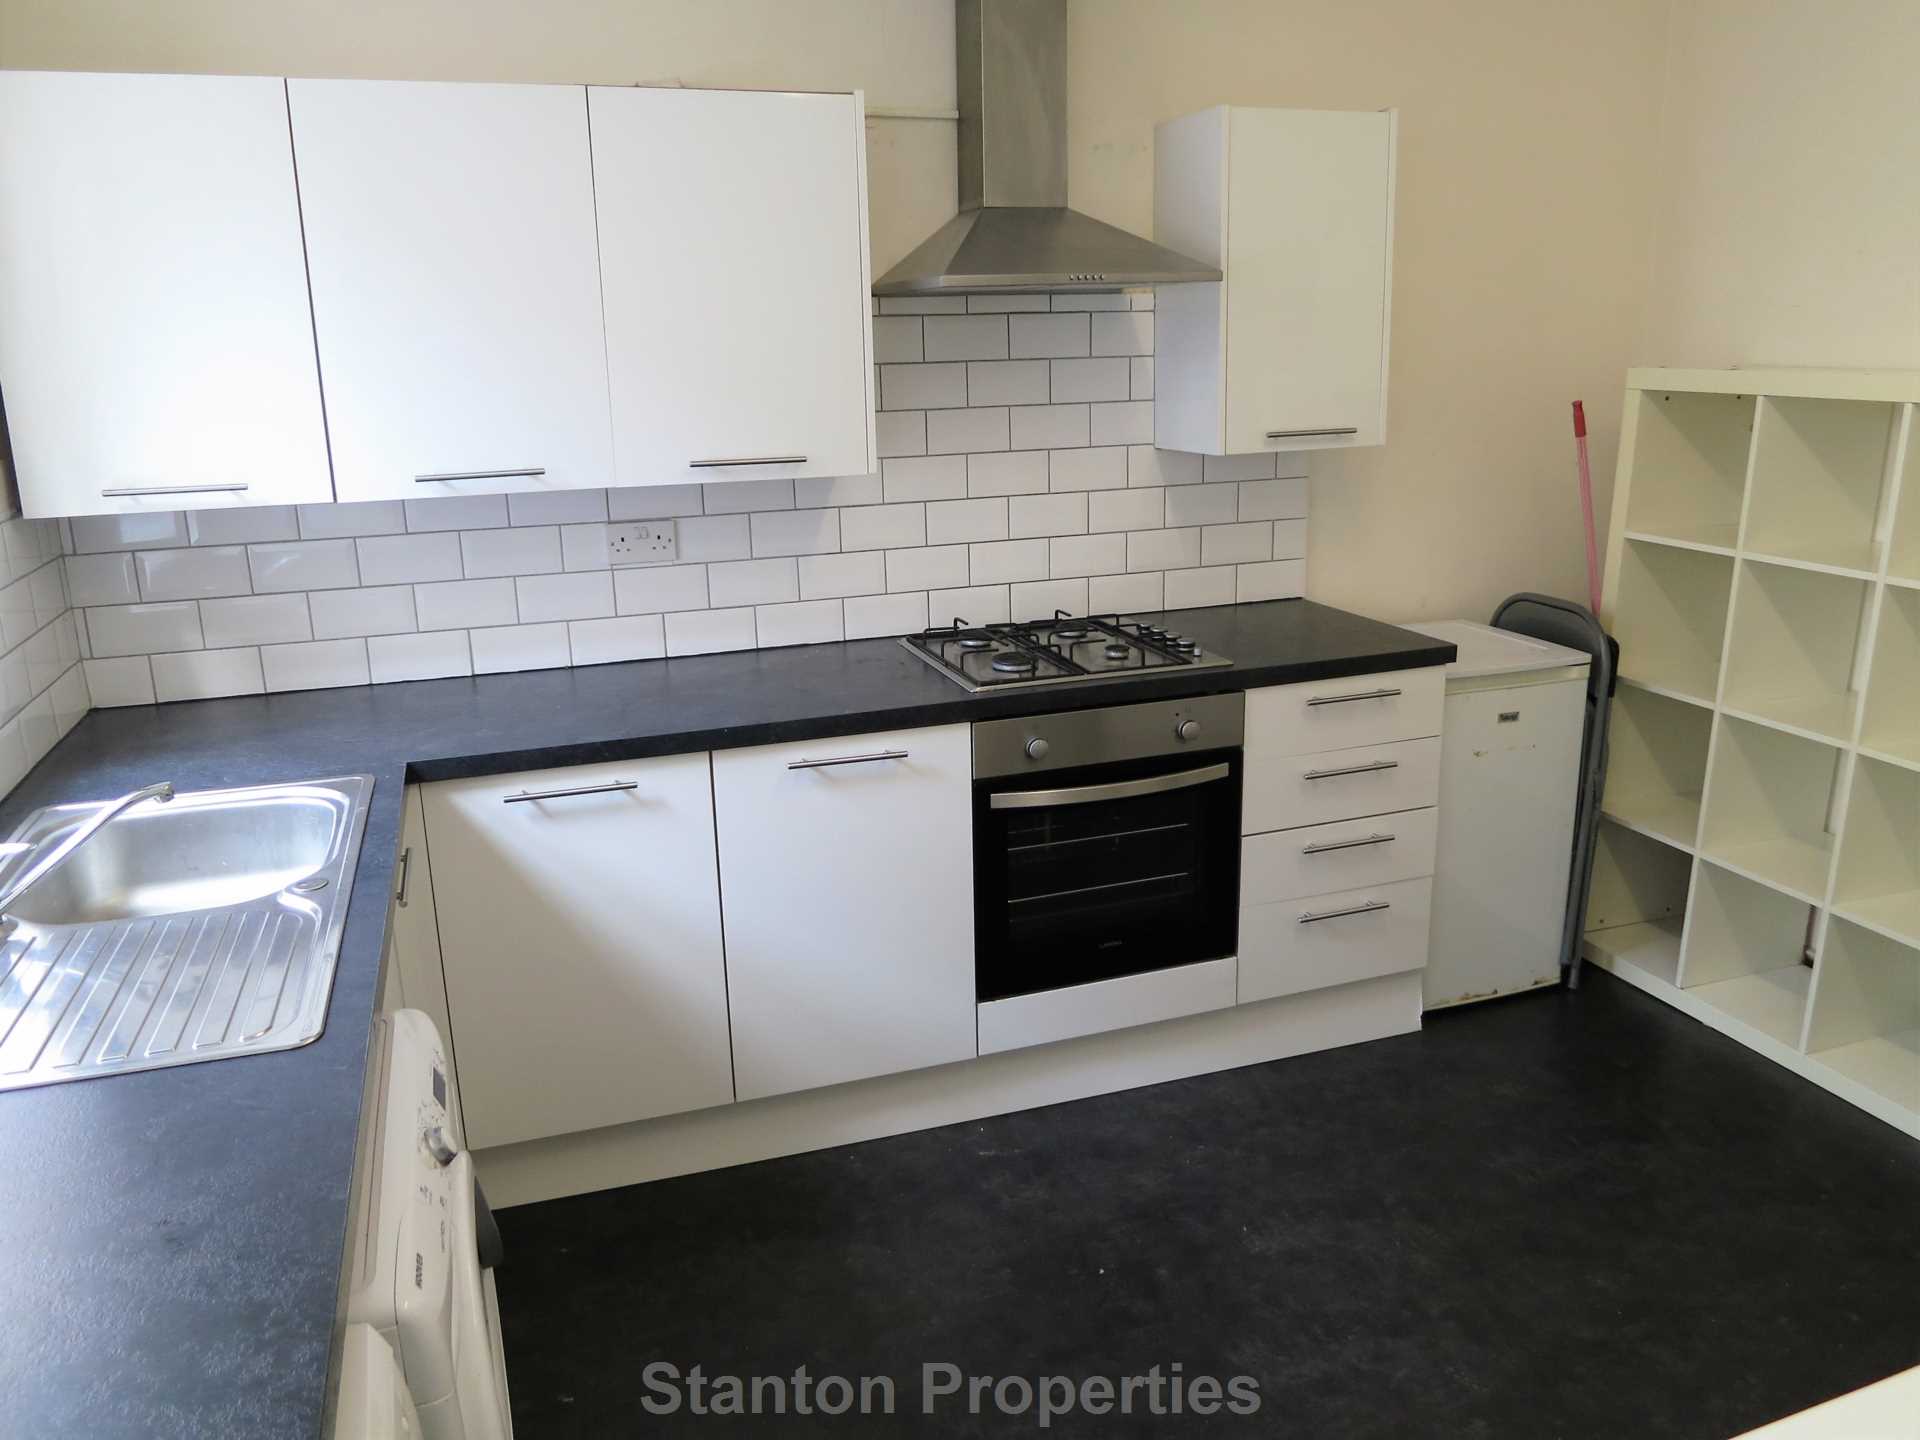 £120 pppw excluding bills, Copson Street, Withington, Image 2